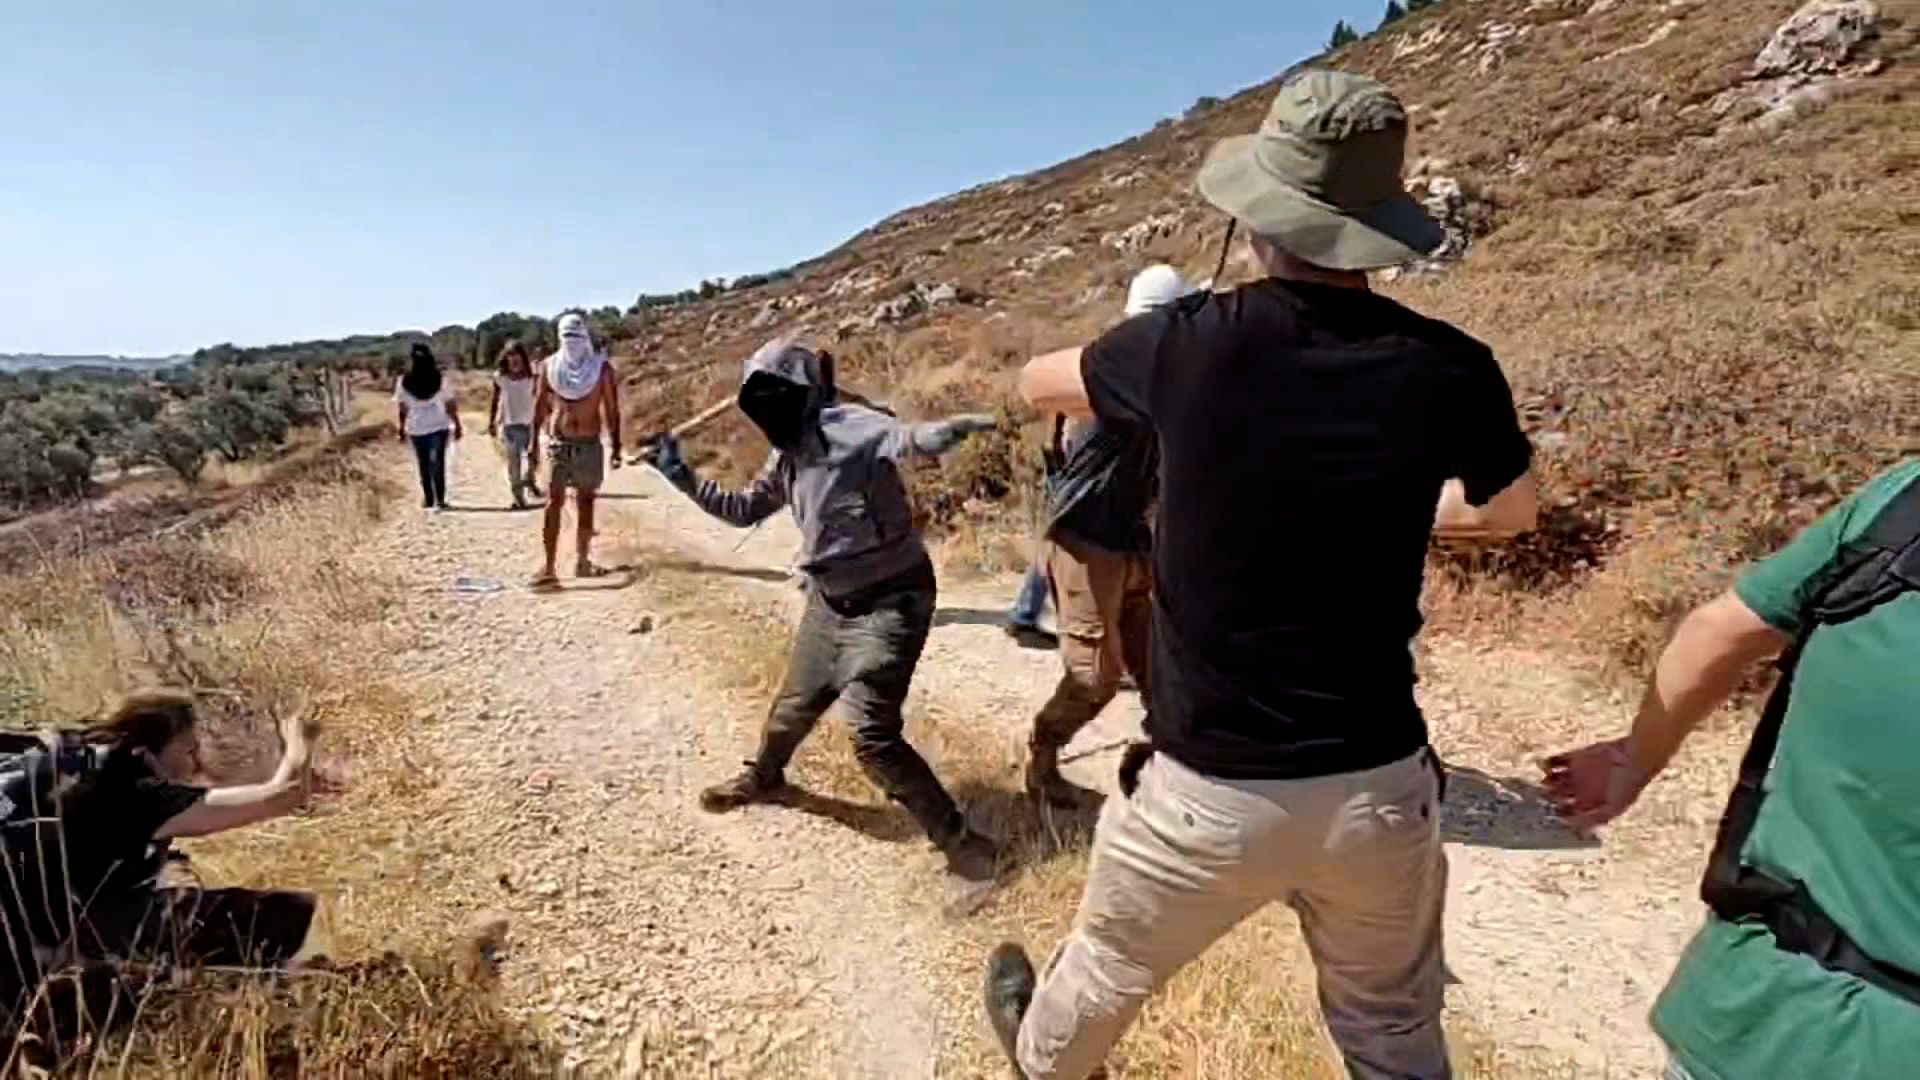 Masked Israeli settlers and Palestinian farmers and foreign activists clash in the West Bank town of Qusra on Sunday, in this screengrab made from a video obtained by CNN.